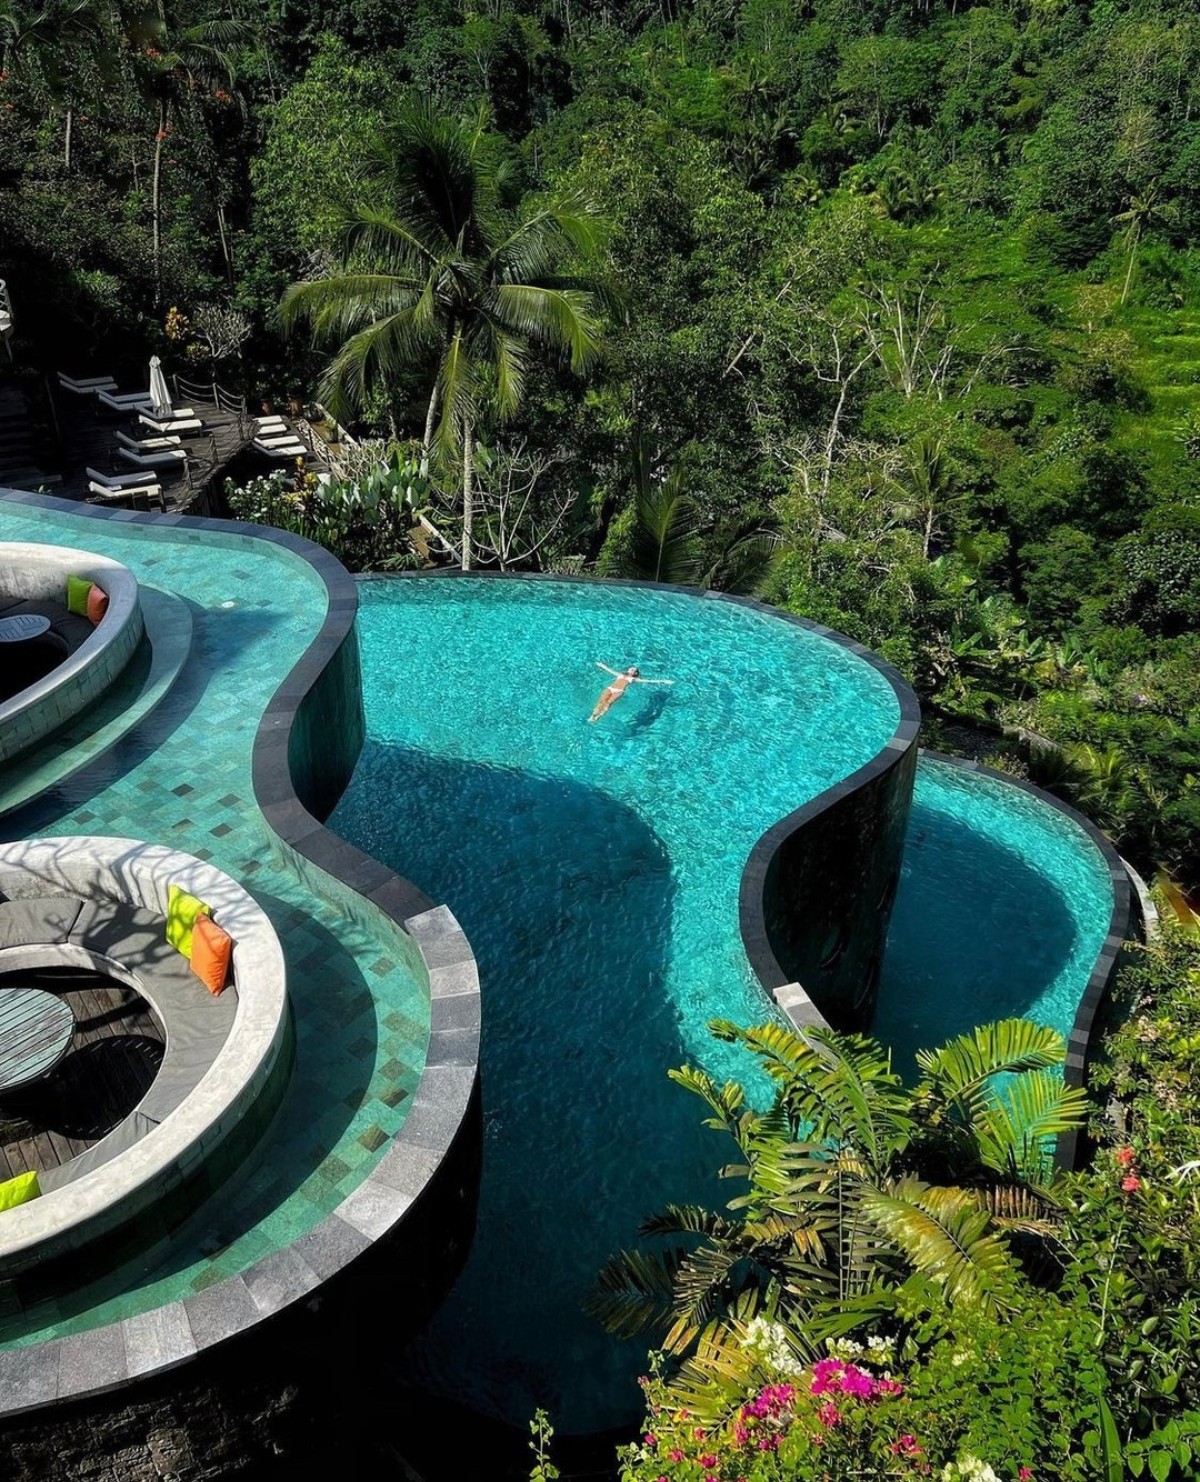 An azure pool winding through a jungle backdrop, with a lone swimmer floating amidst the tranquility in Ubud, Bali.